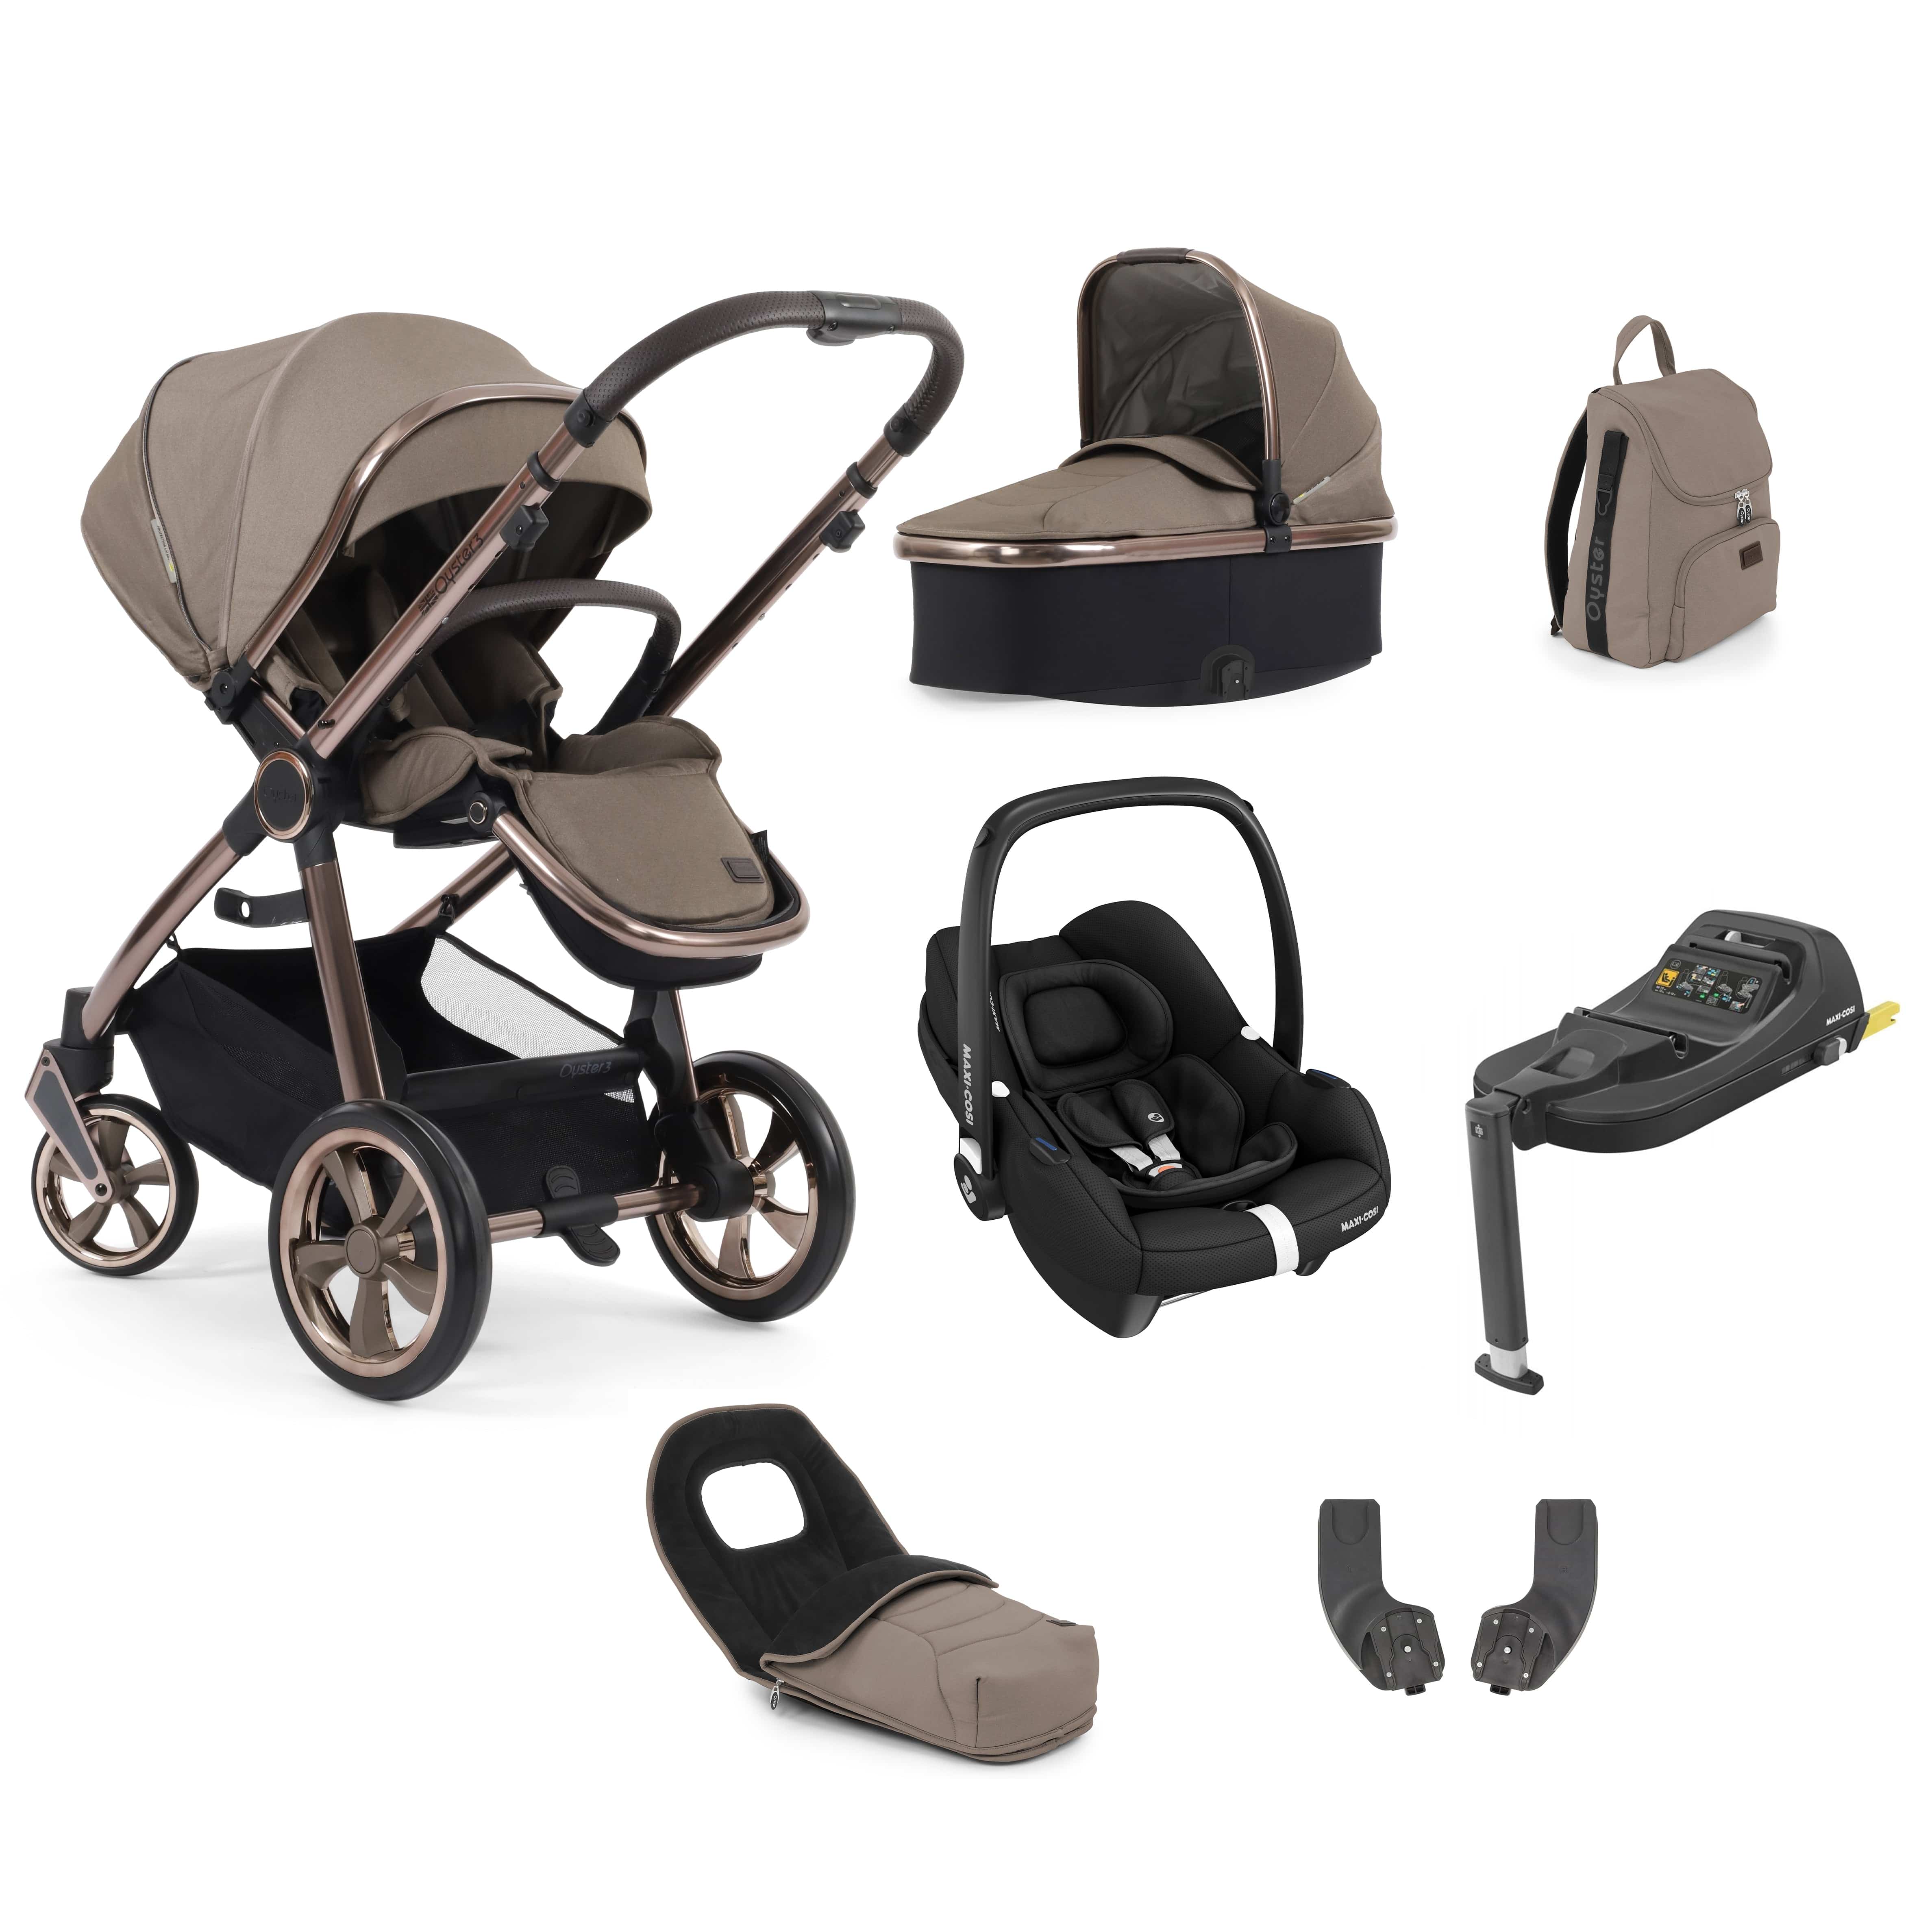 Babystyle Oyster 3 Luxury 7 Piece with Car Seat Bundle in Mink Travel Systems 14814-MNK 5060711566894